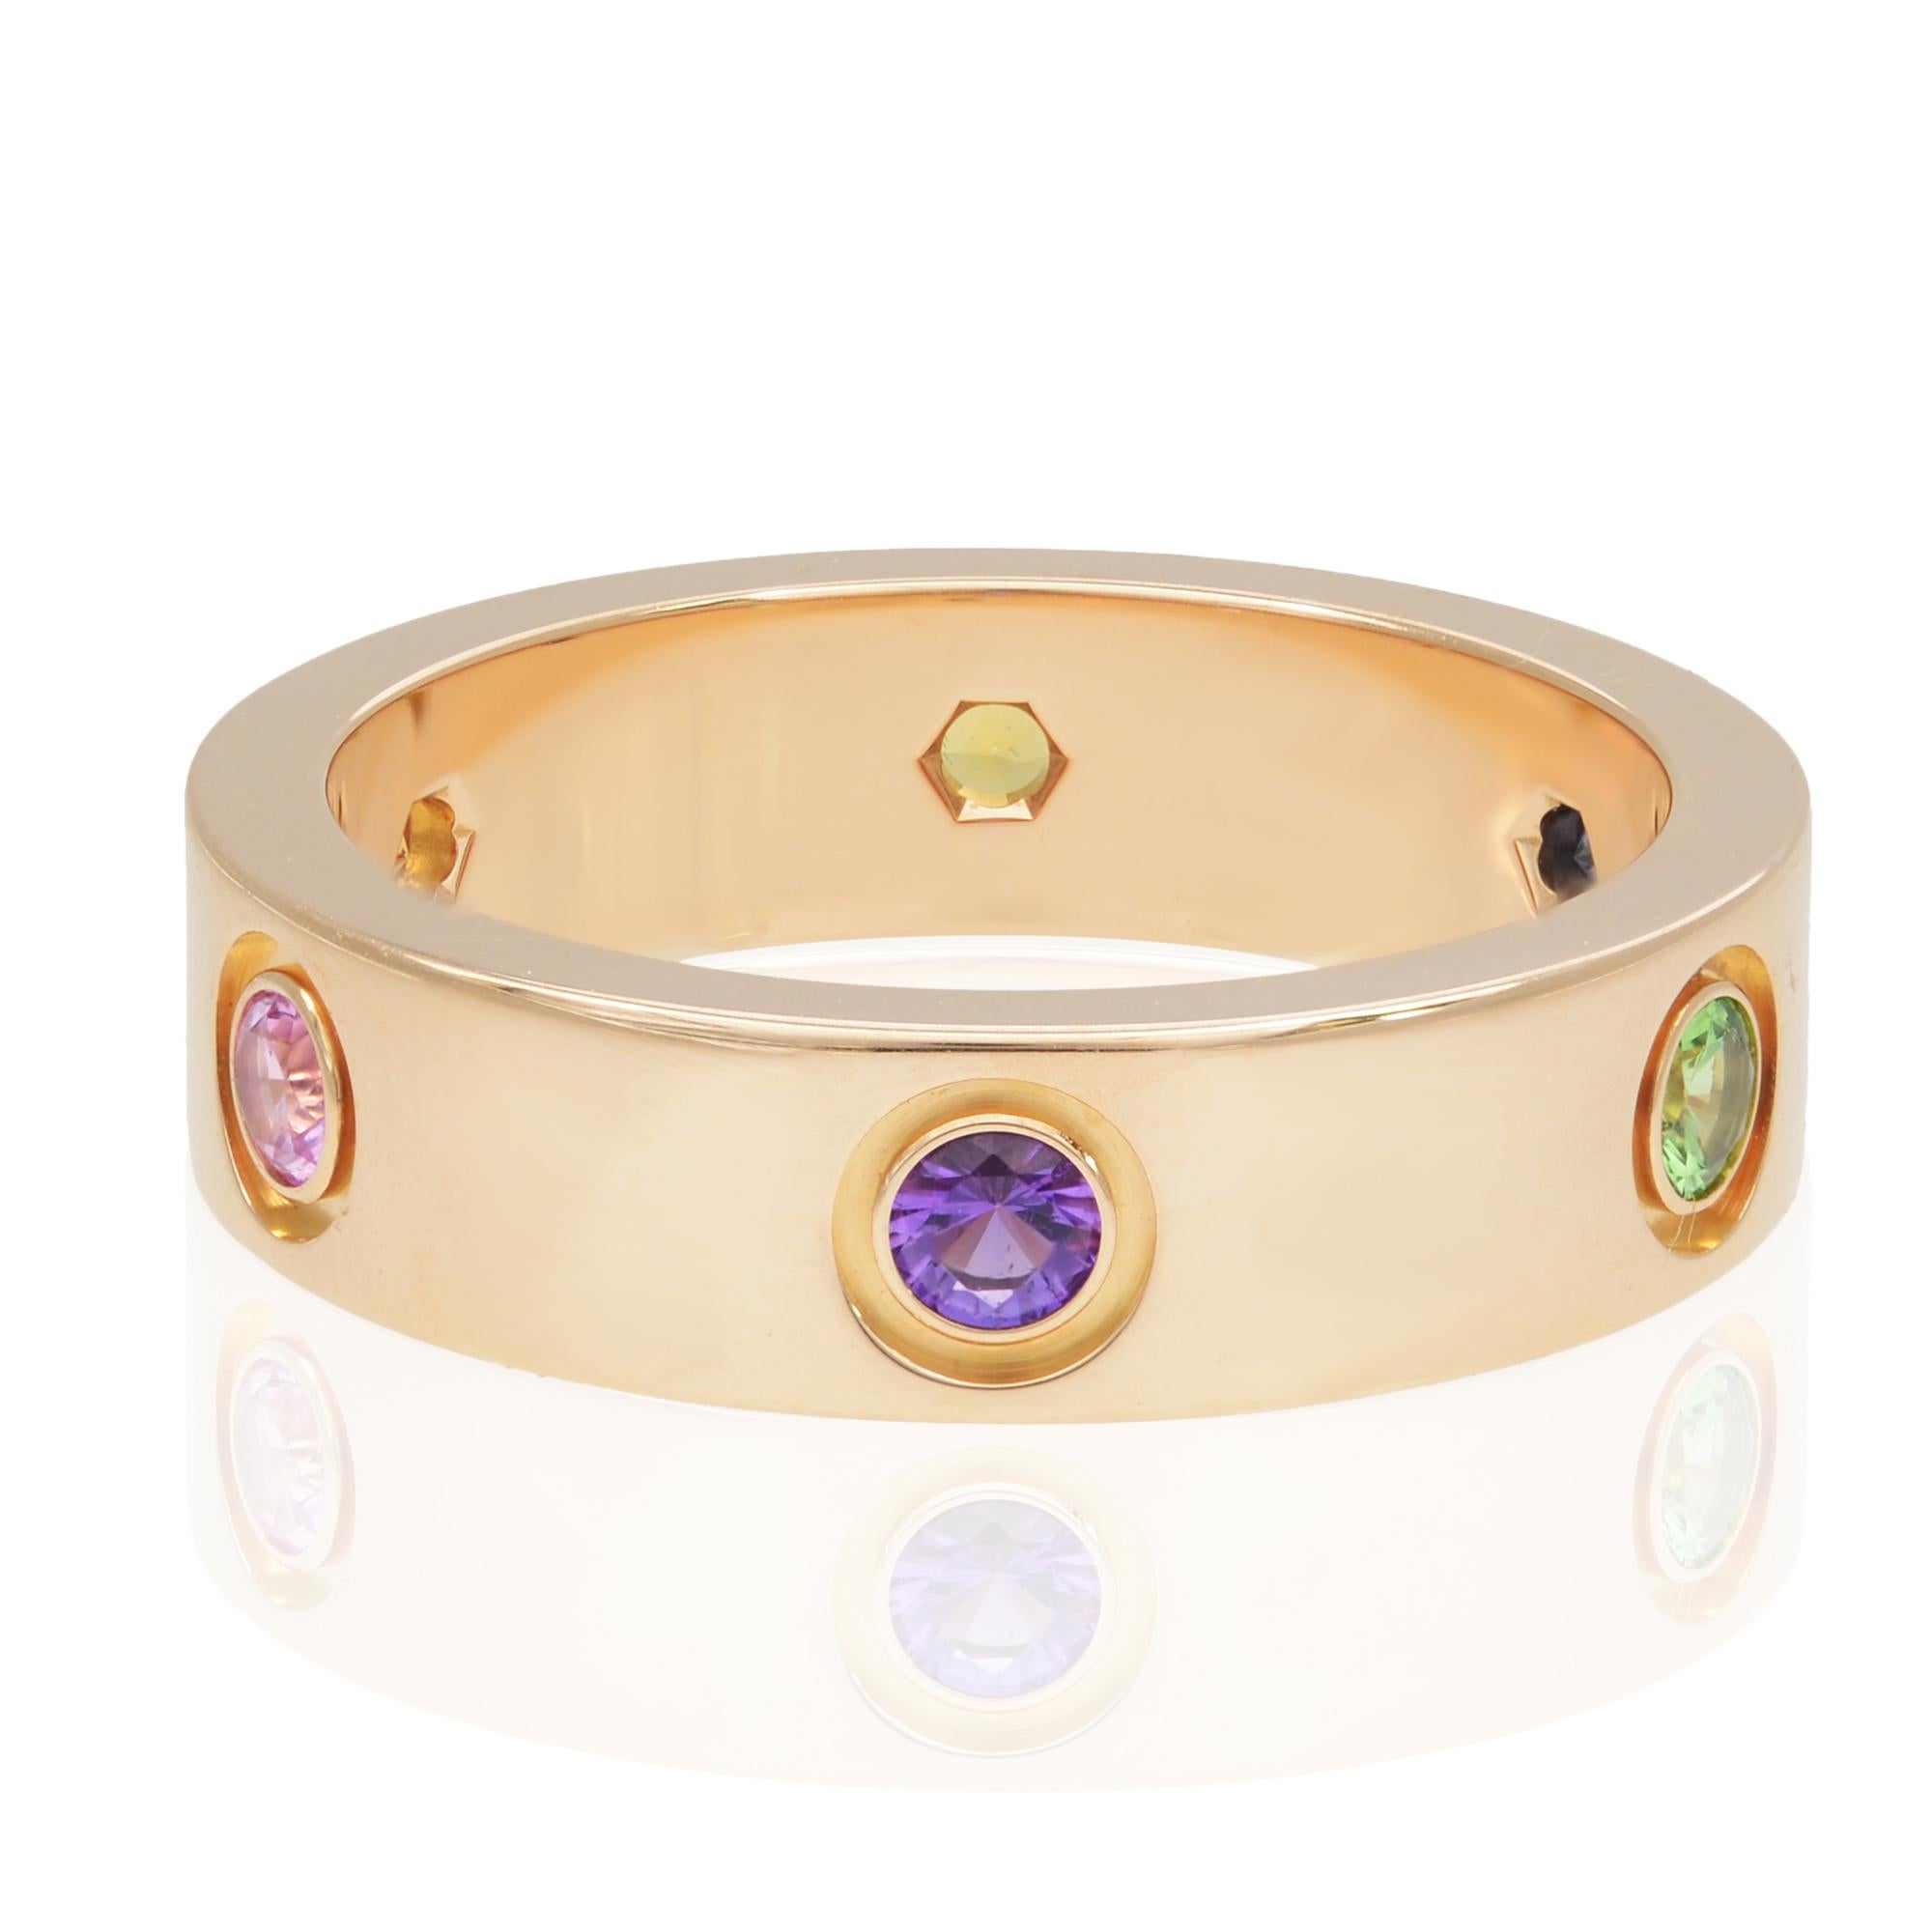 Cartier multicolor ring in 18K rose gold. Set with 1 rose sapphire, 1 blue sapphire, 1 yellow sapphire, 1 green garnet, 1 orange garnet and 1 amethyst. Width of the rings is 5.5mm. Ring size 57 US 8. Excellent pre-owned condition. Come with with